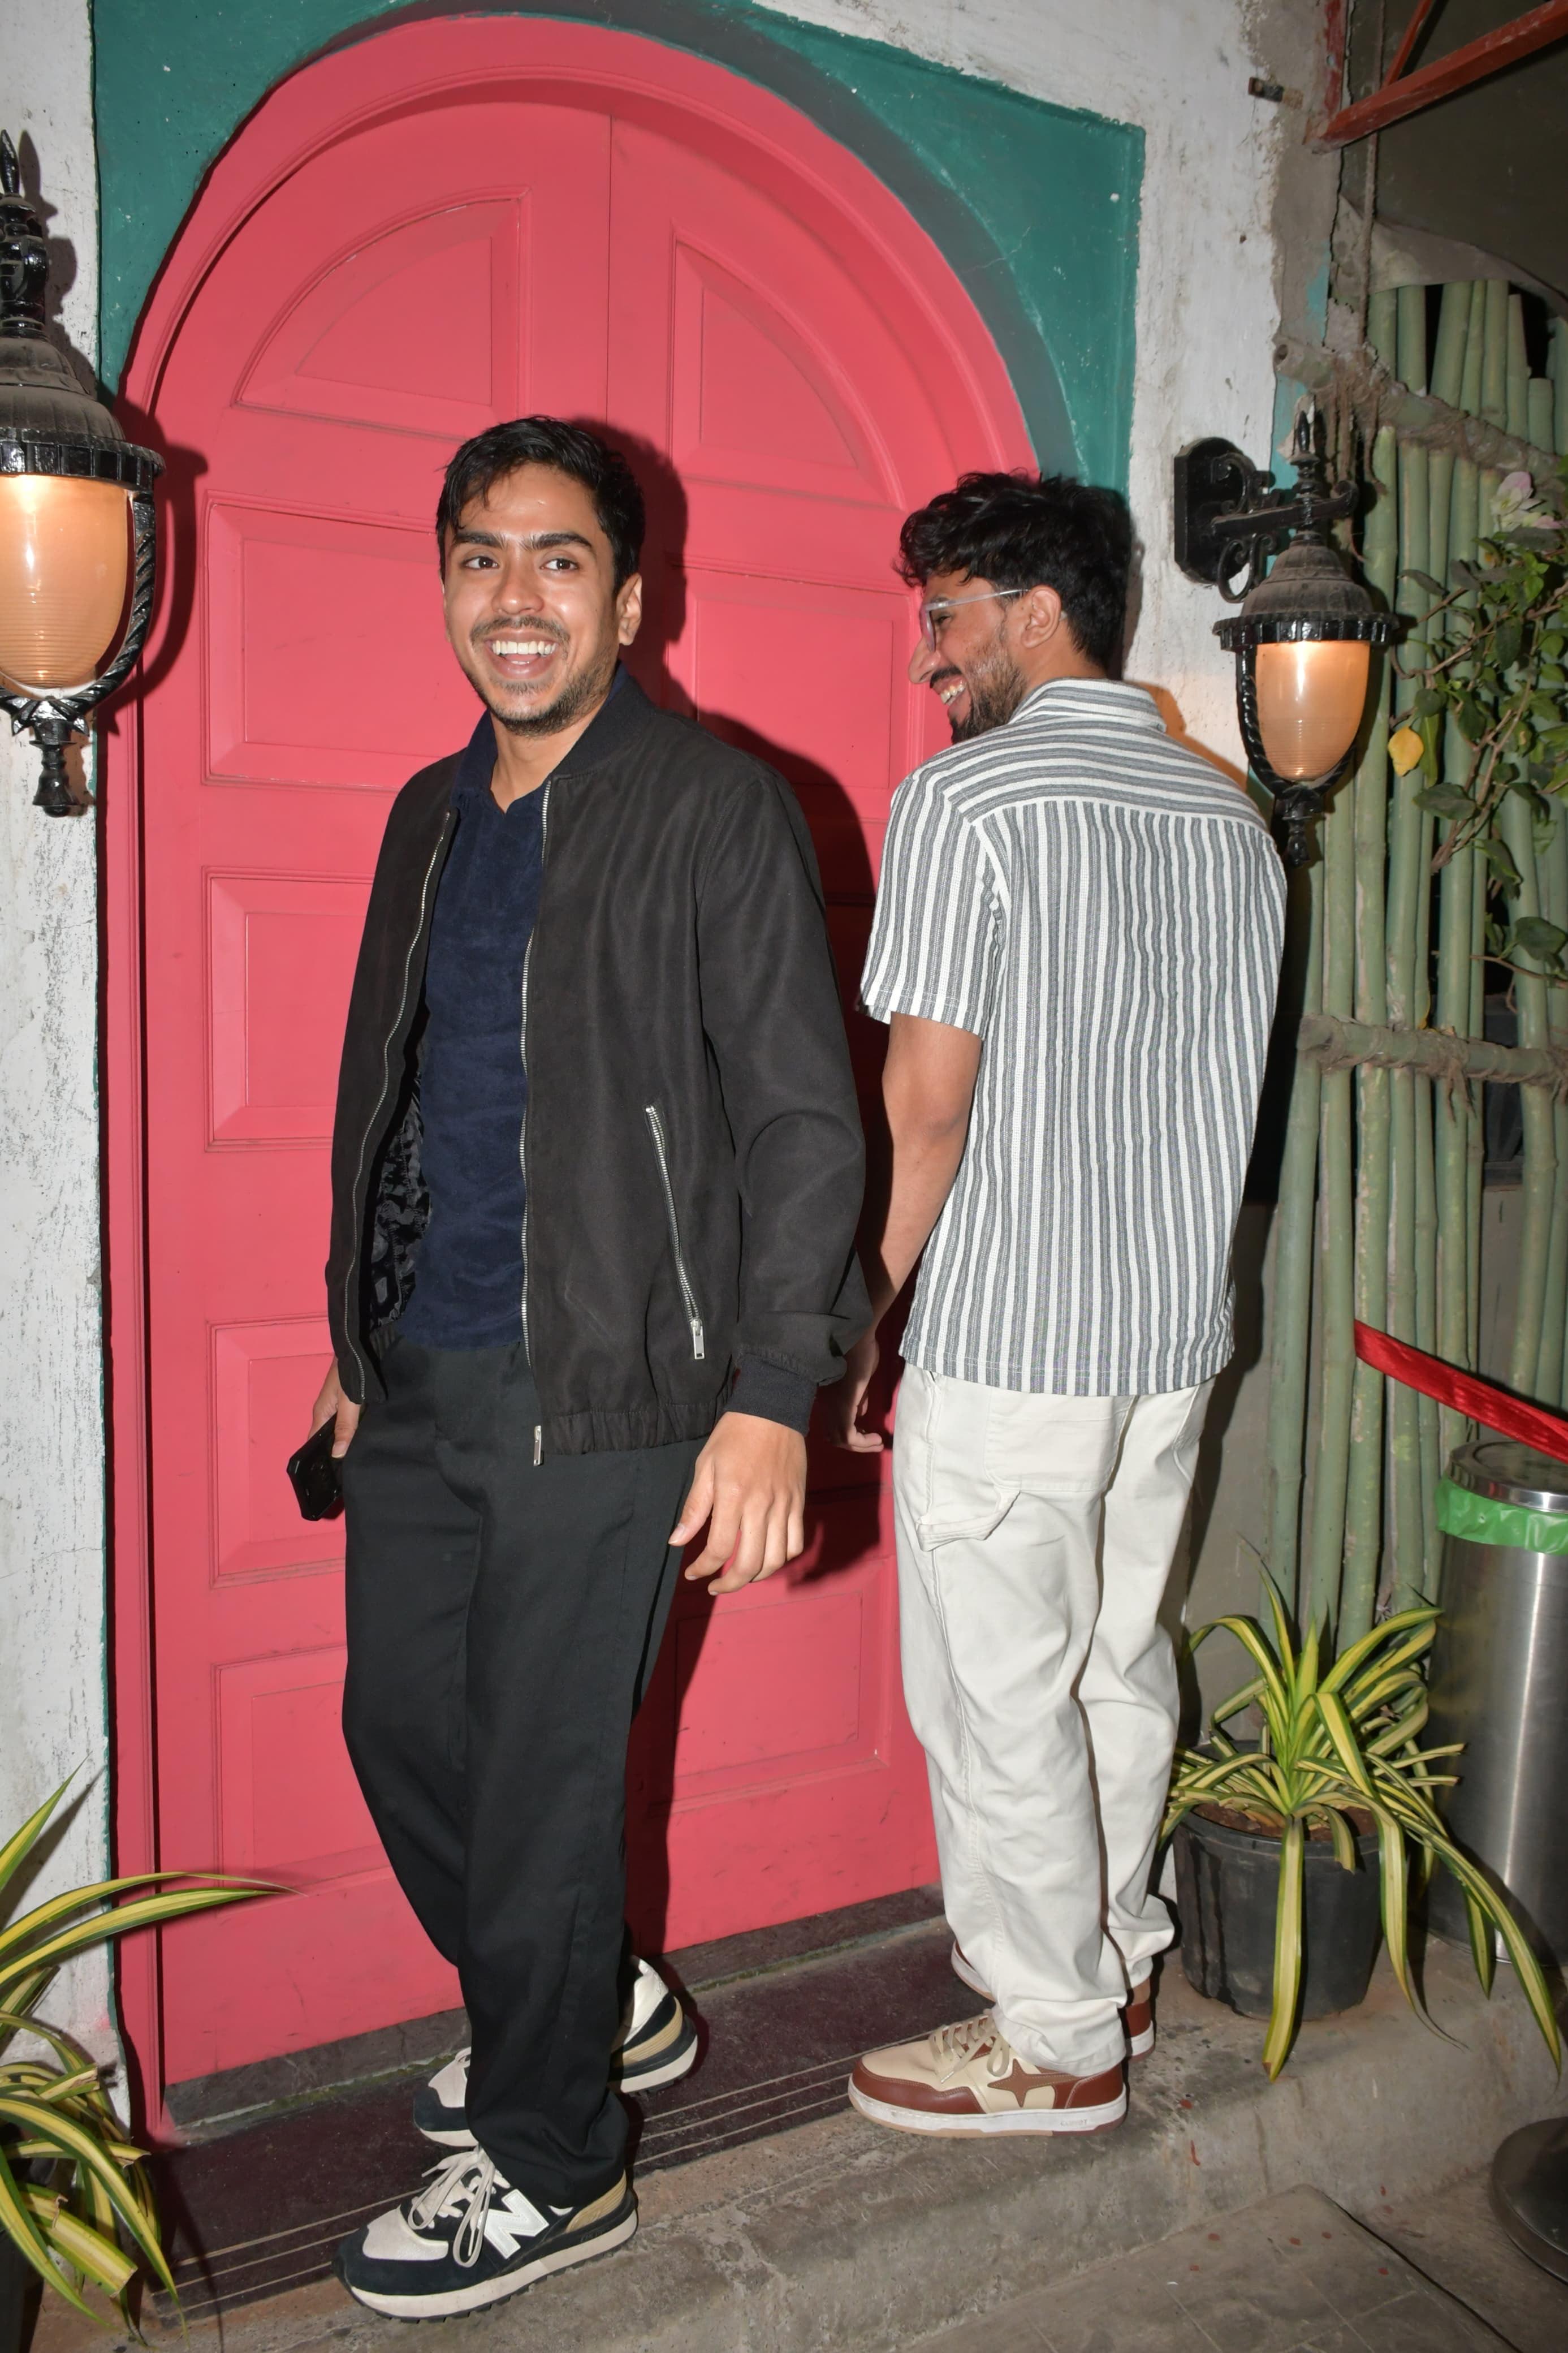 The actor shared a few laughs with the paparazzi before heading inside the restaurant